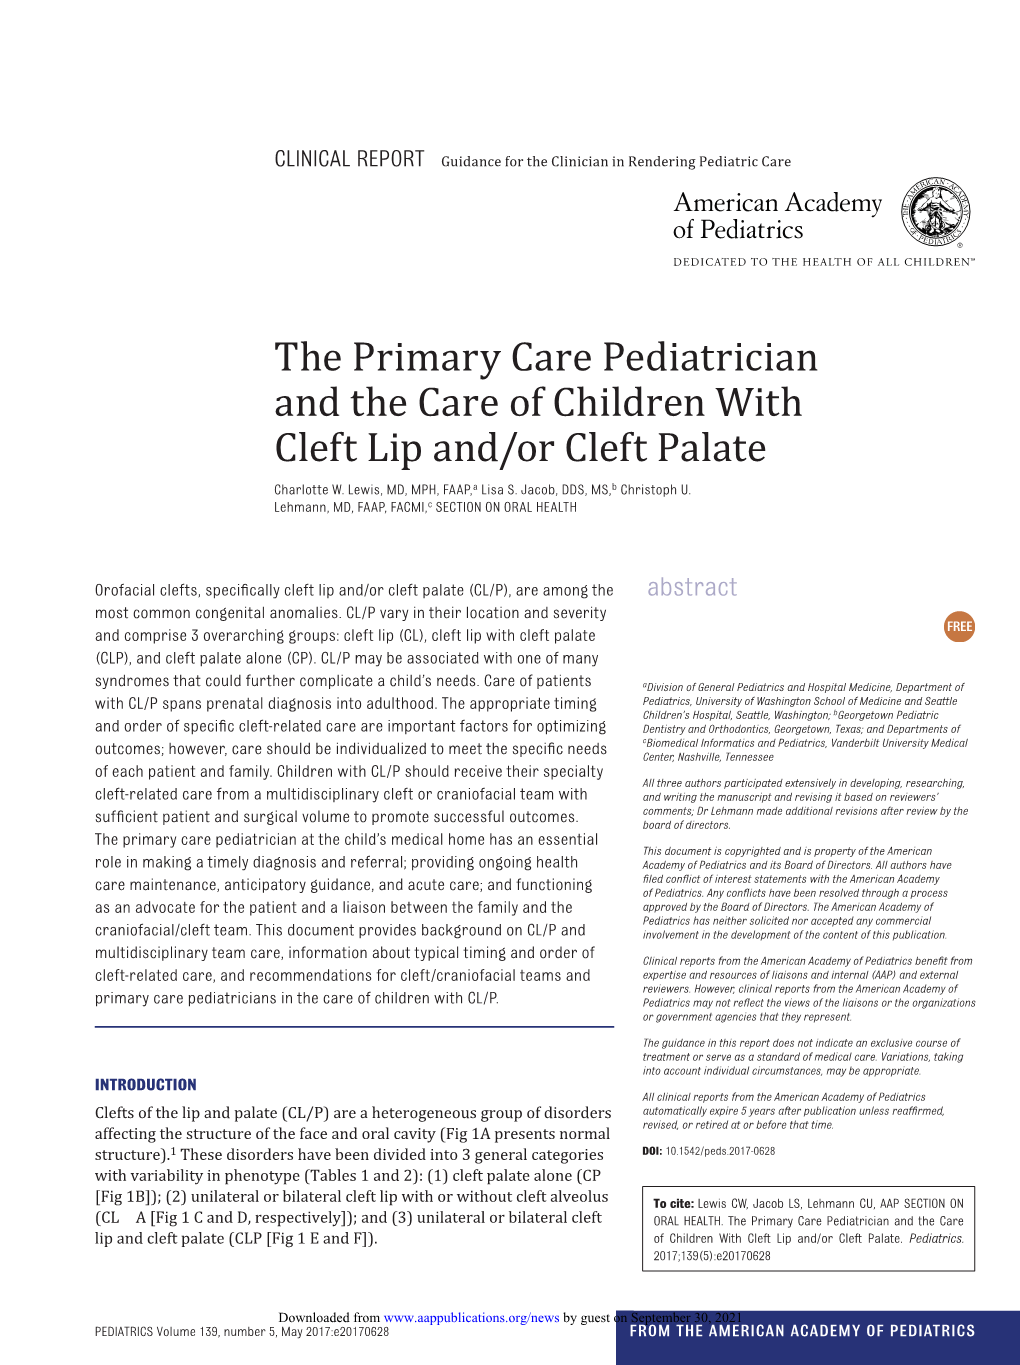 The Primary Care Pediatrician and the Care of Children with Cleft Lip And/Or Cleft Palate Charlotte W